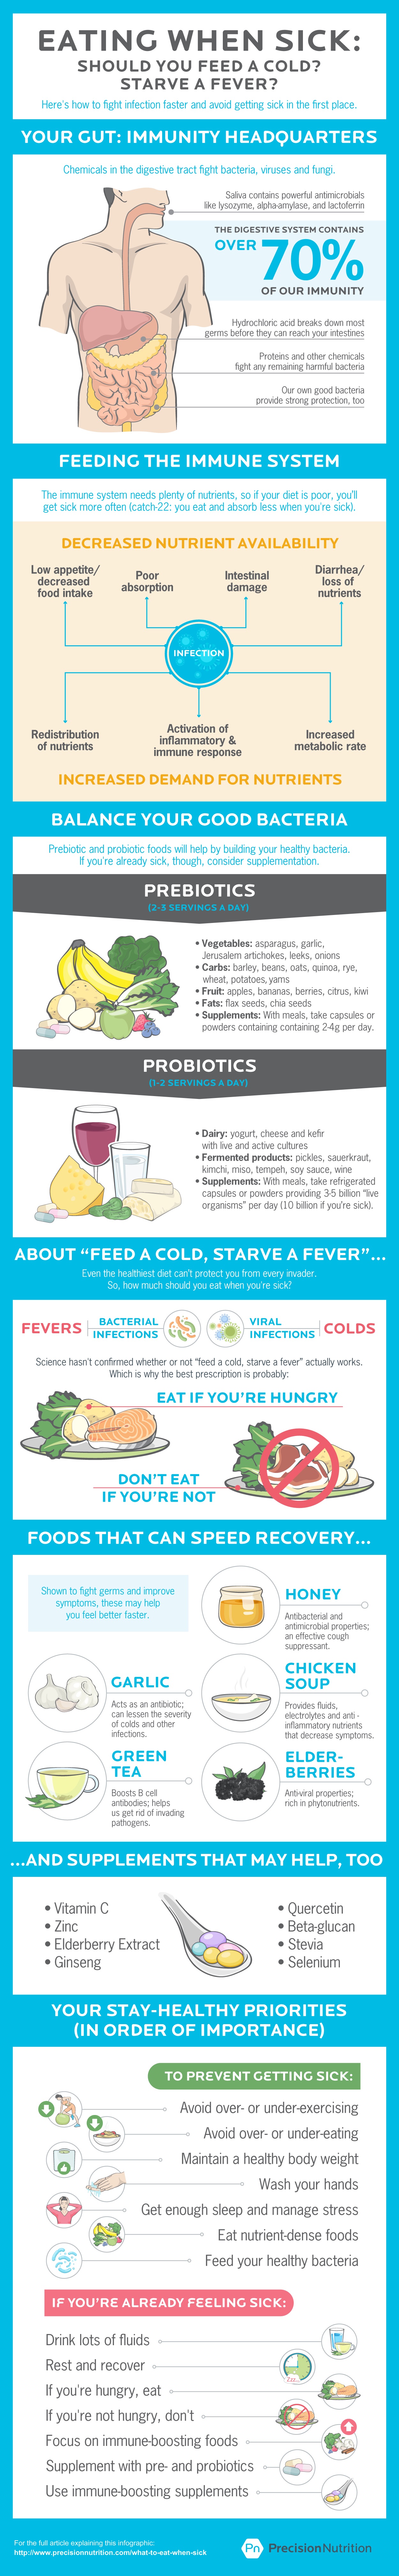 what to eat when you're sick